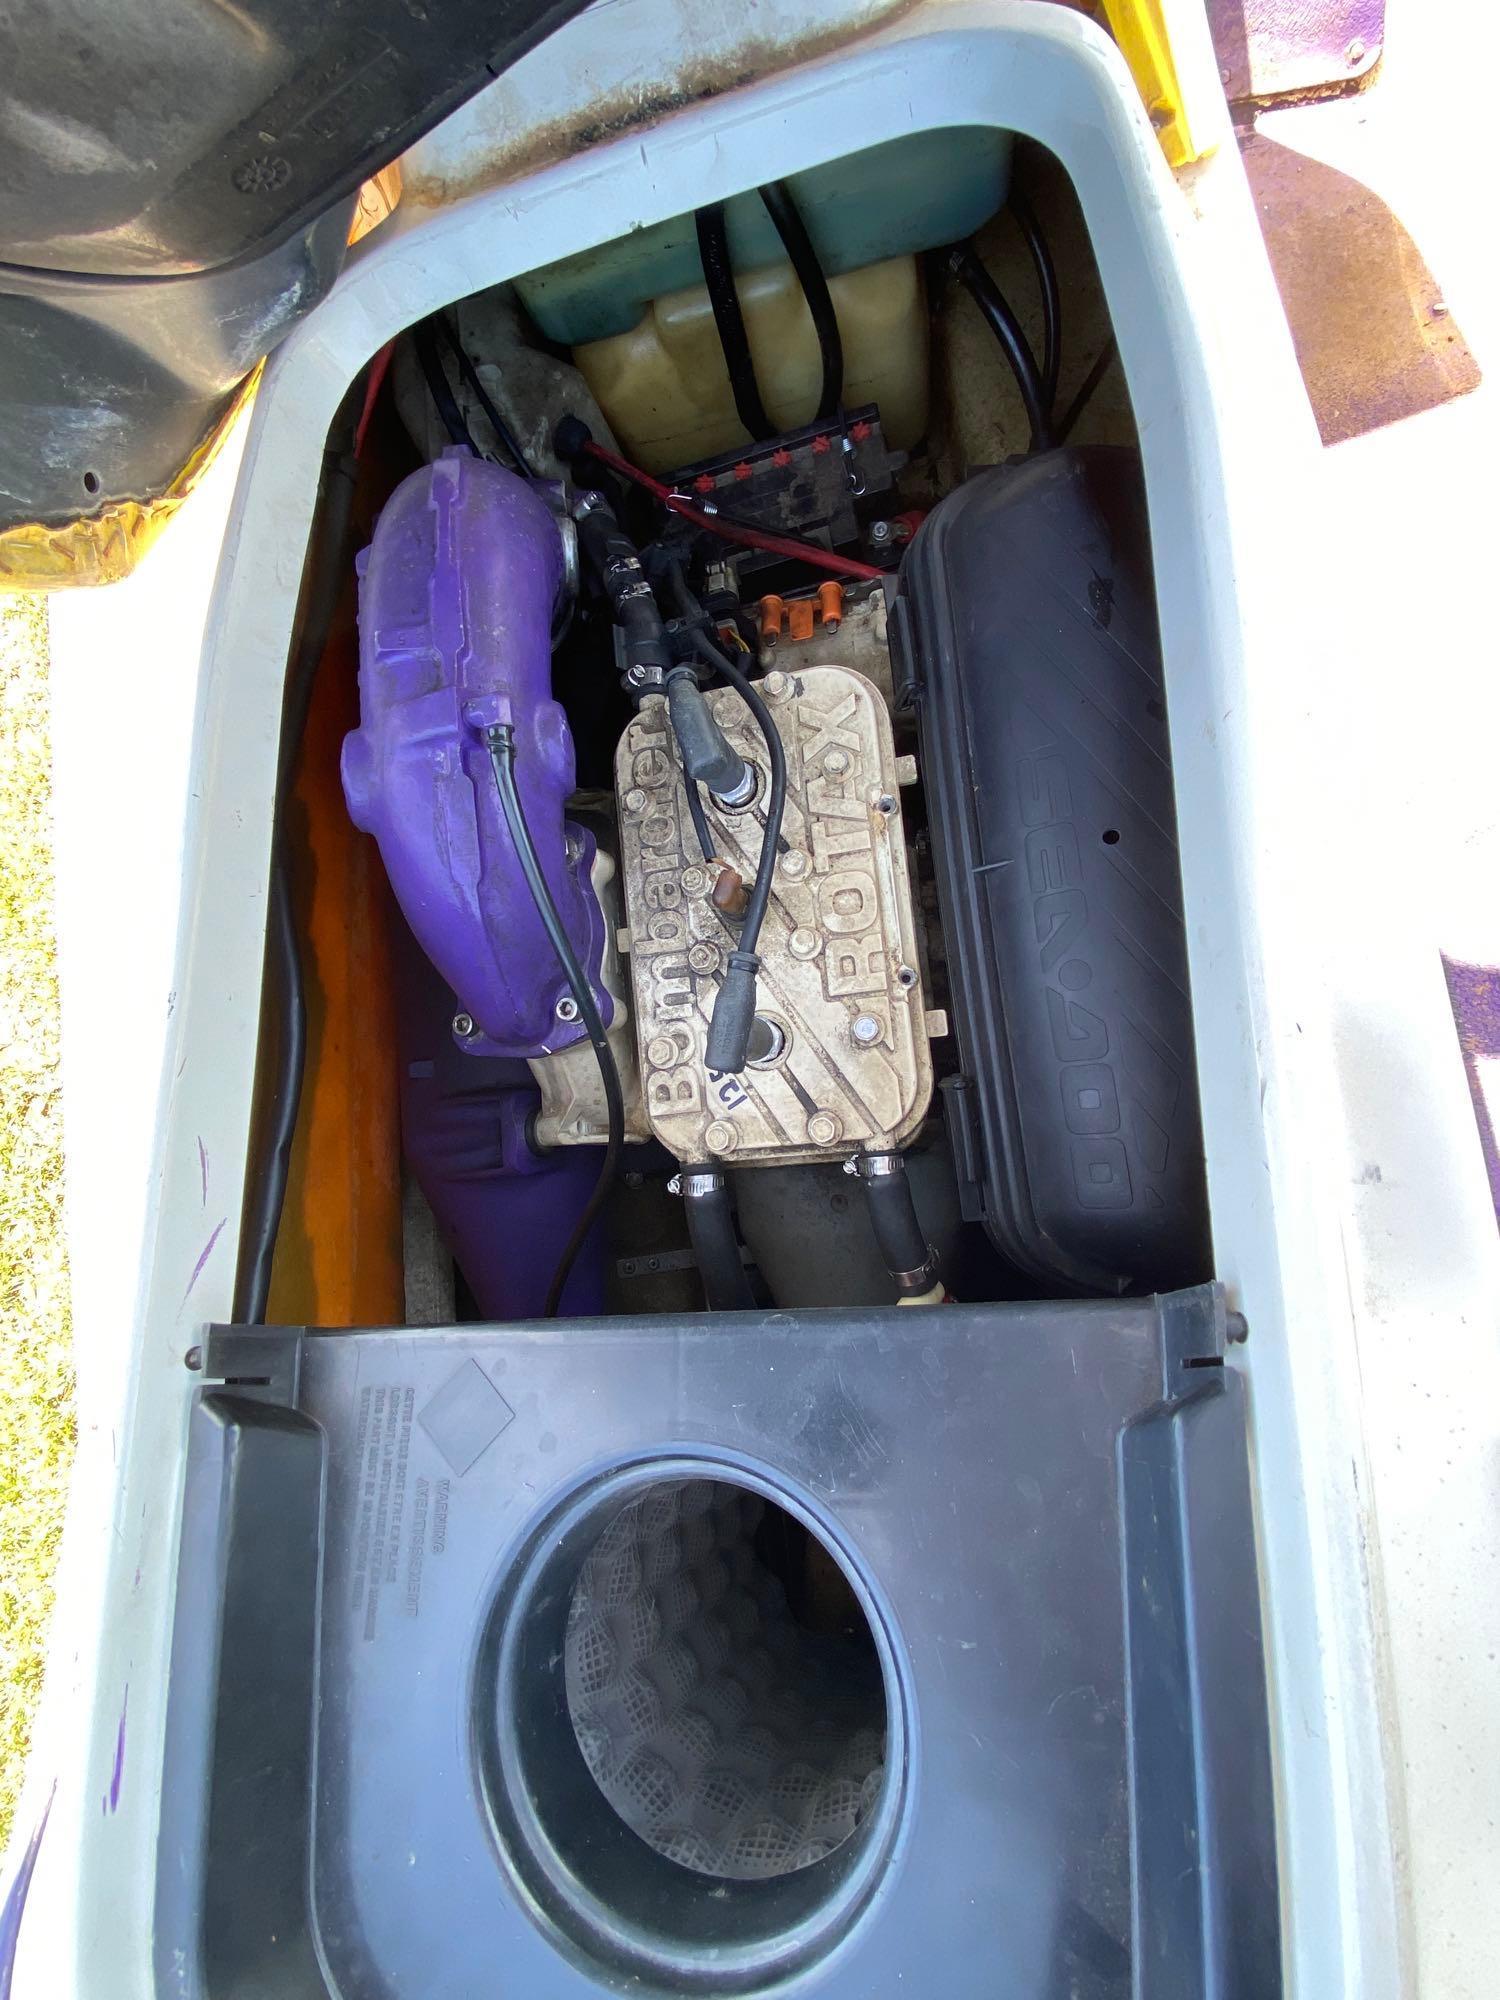 1995 SEA DOO FIBERGLASS INBOARD RAN WHEN PARKED, NEEDS NEW BATTERY AND CARB JOB TITLE #